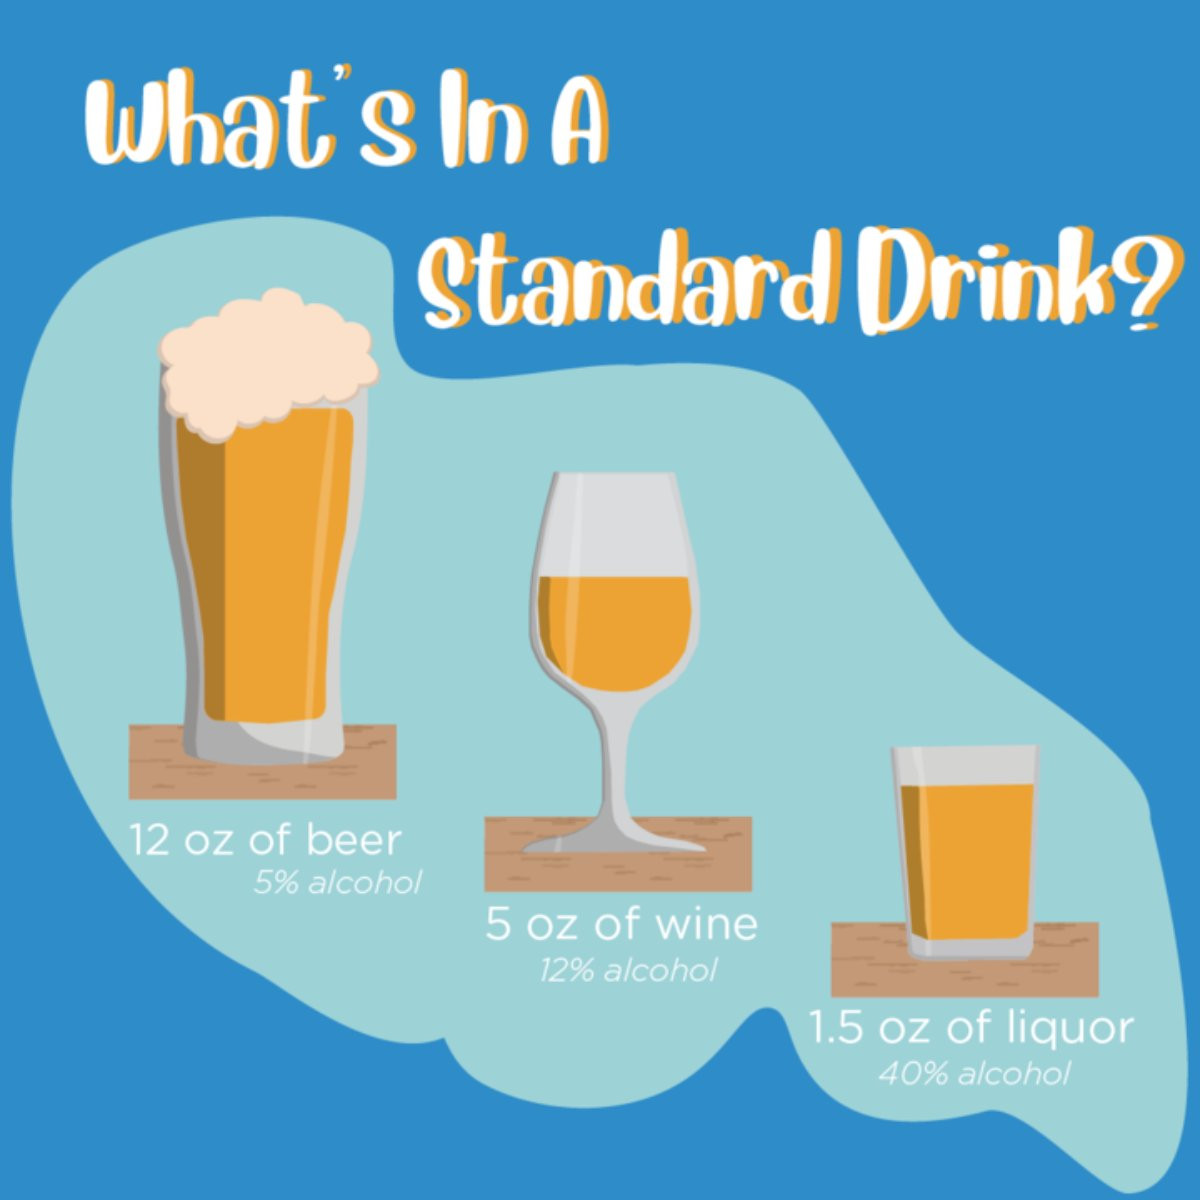 A graphic that says What's in a Standard Drink? with a Beer that has a caption of 12 oz of beer 5% alcohol, a wine glass with 5 oz of wine 12% alcohol, and a shot glass of 1.5 oz of liquor 40% alcohol